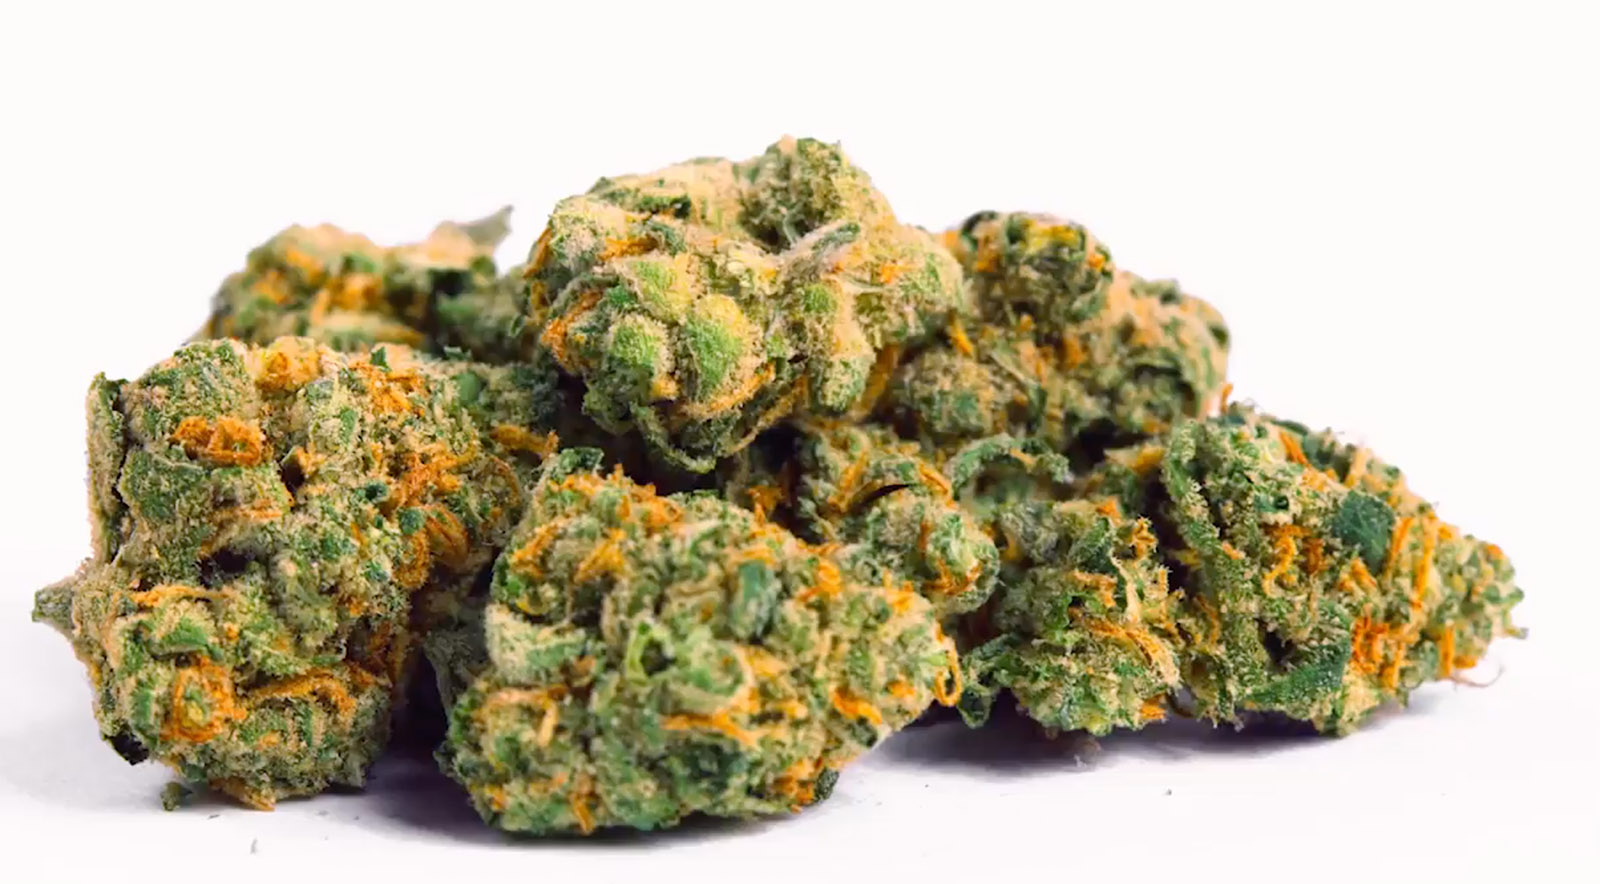 Say Hello to Lamb’s Bread, One of Bob Marley’s Favorite Strains